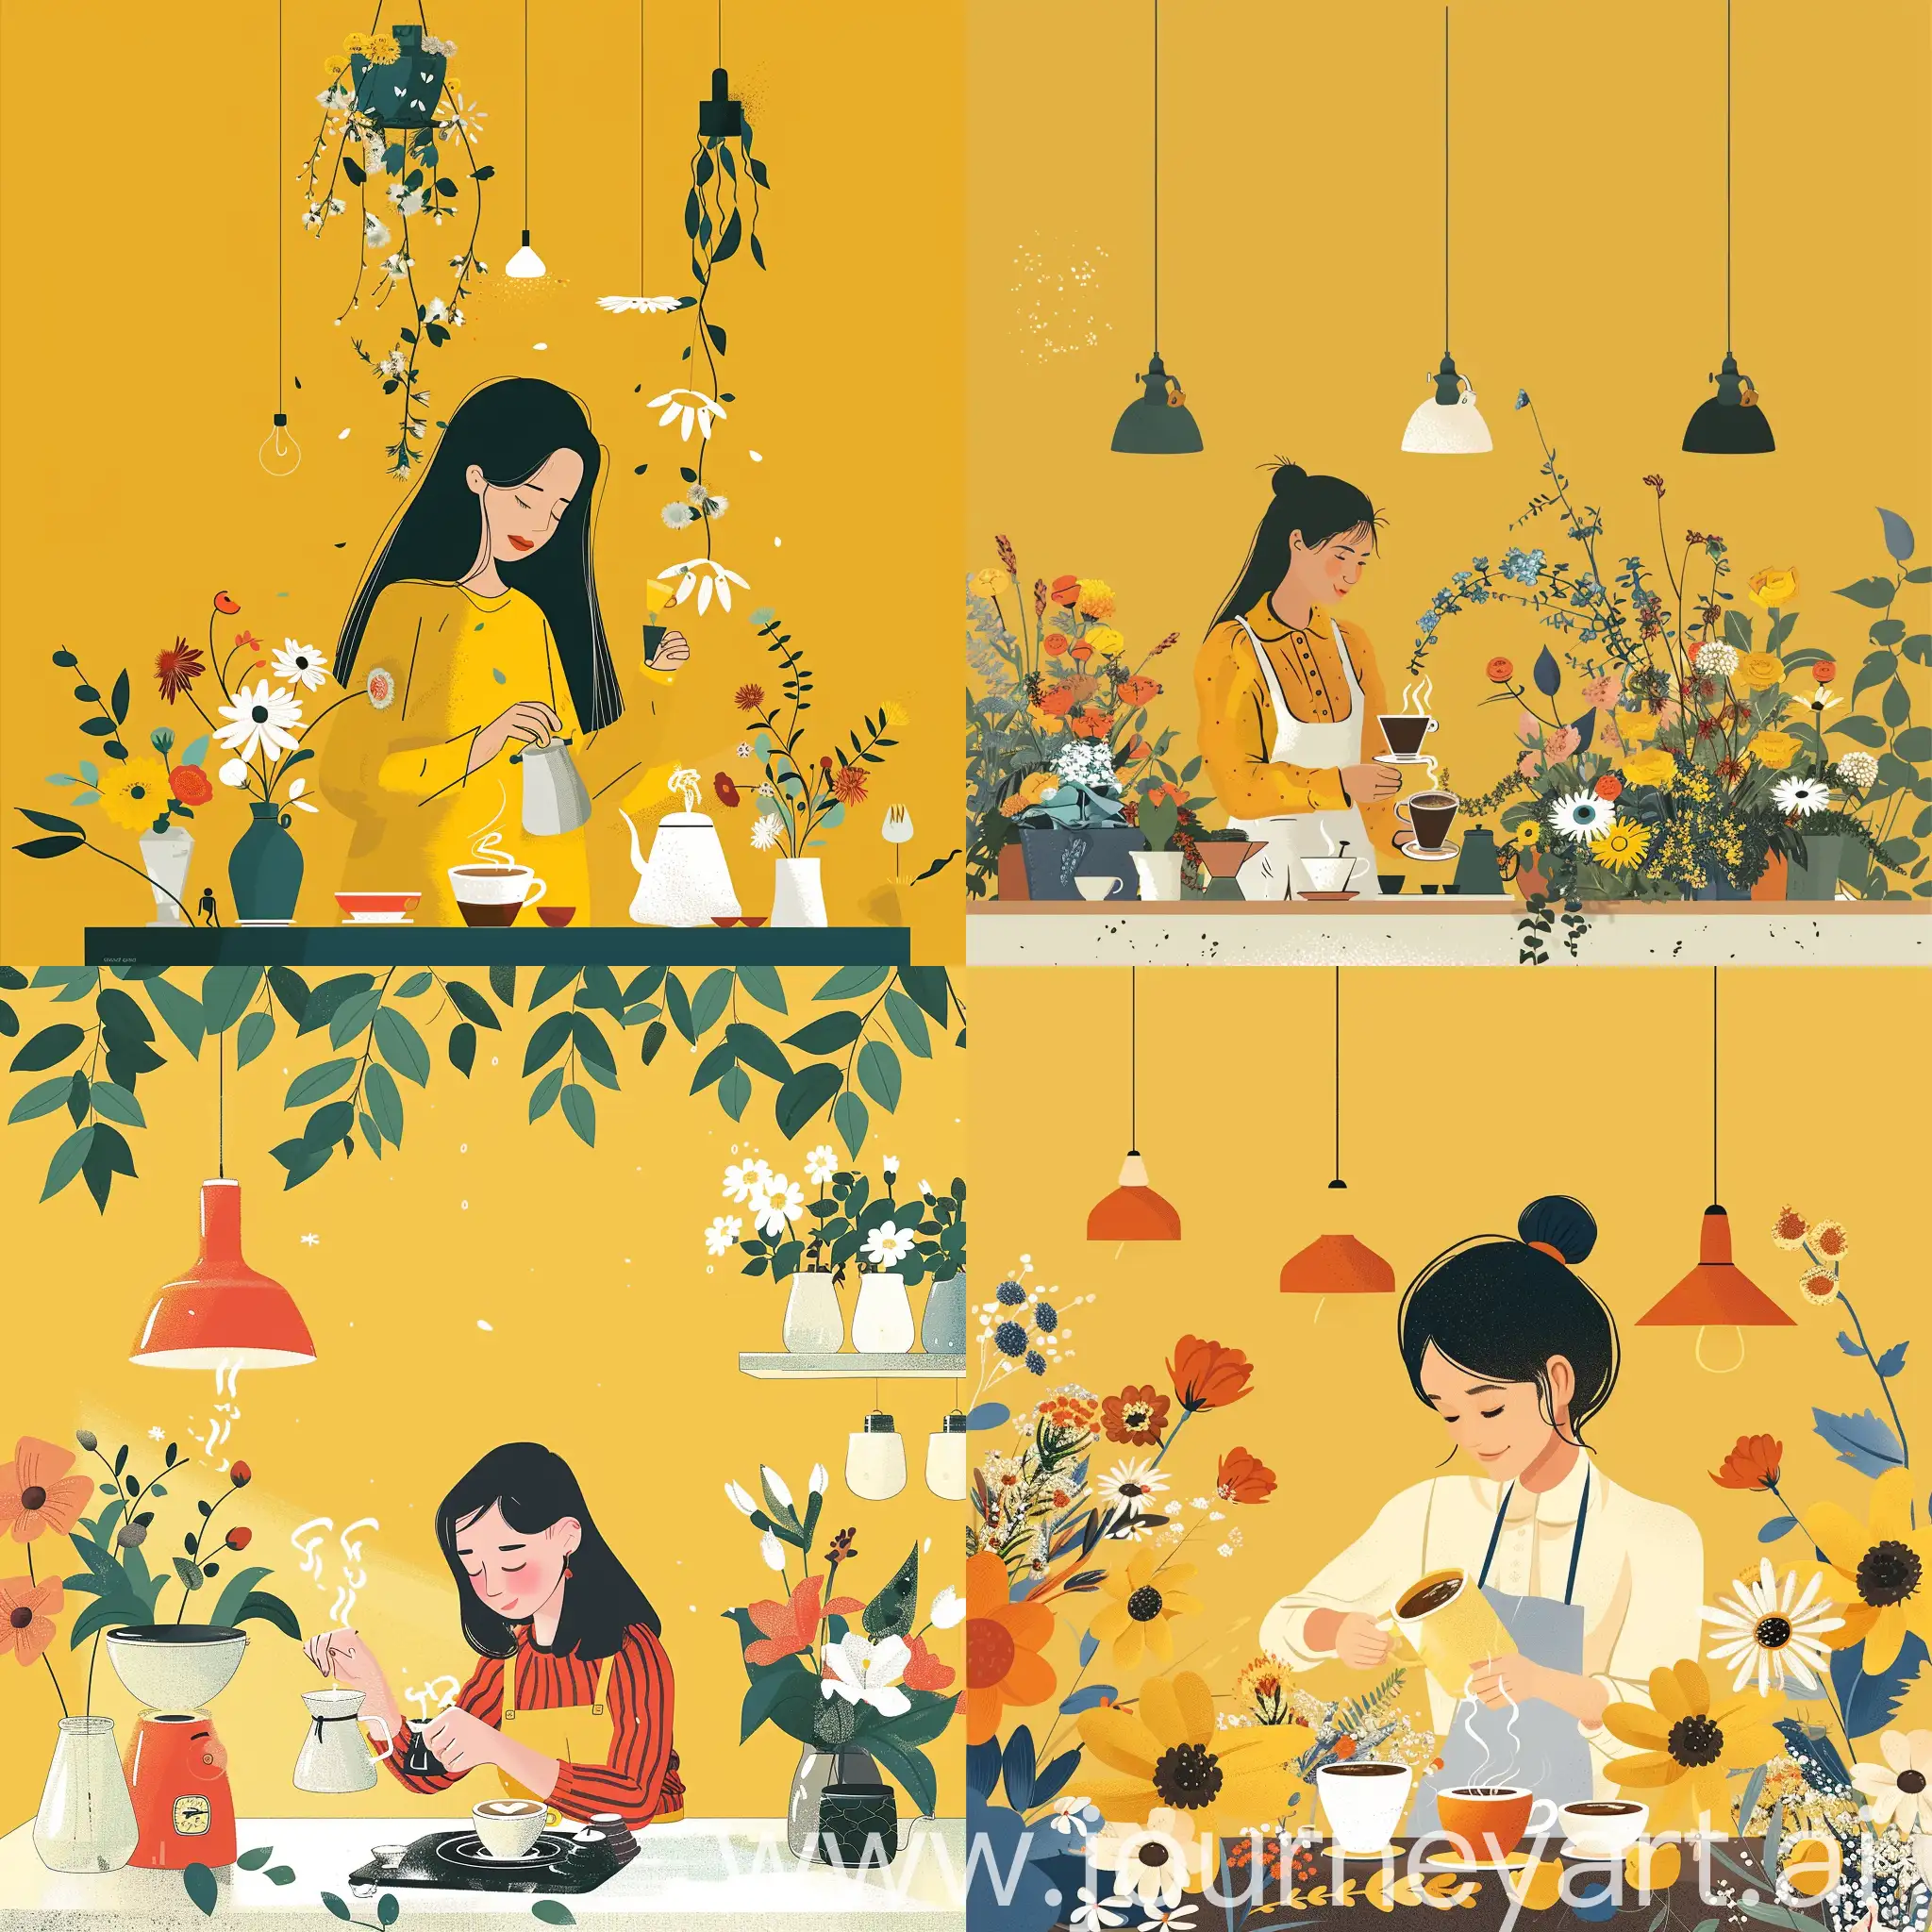 Woman-Making-Coffee-Surrounded-by-Flowers-in-Cozy-Interior-Graphic-Poster-Design